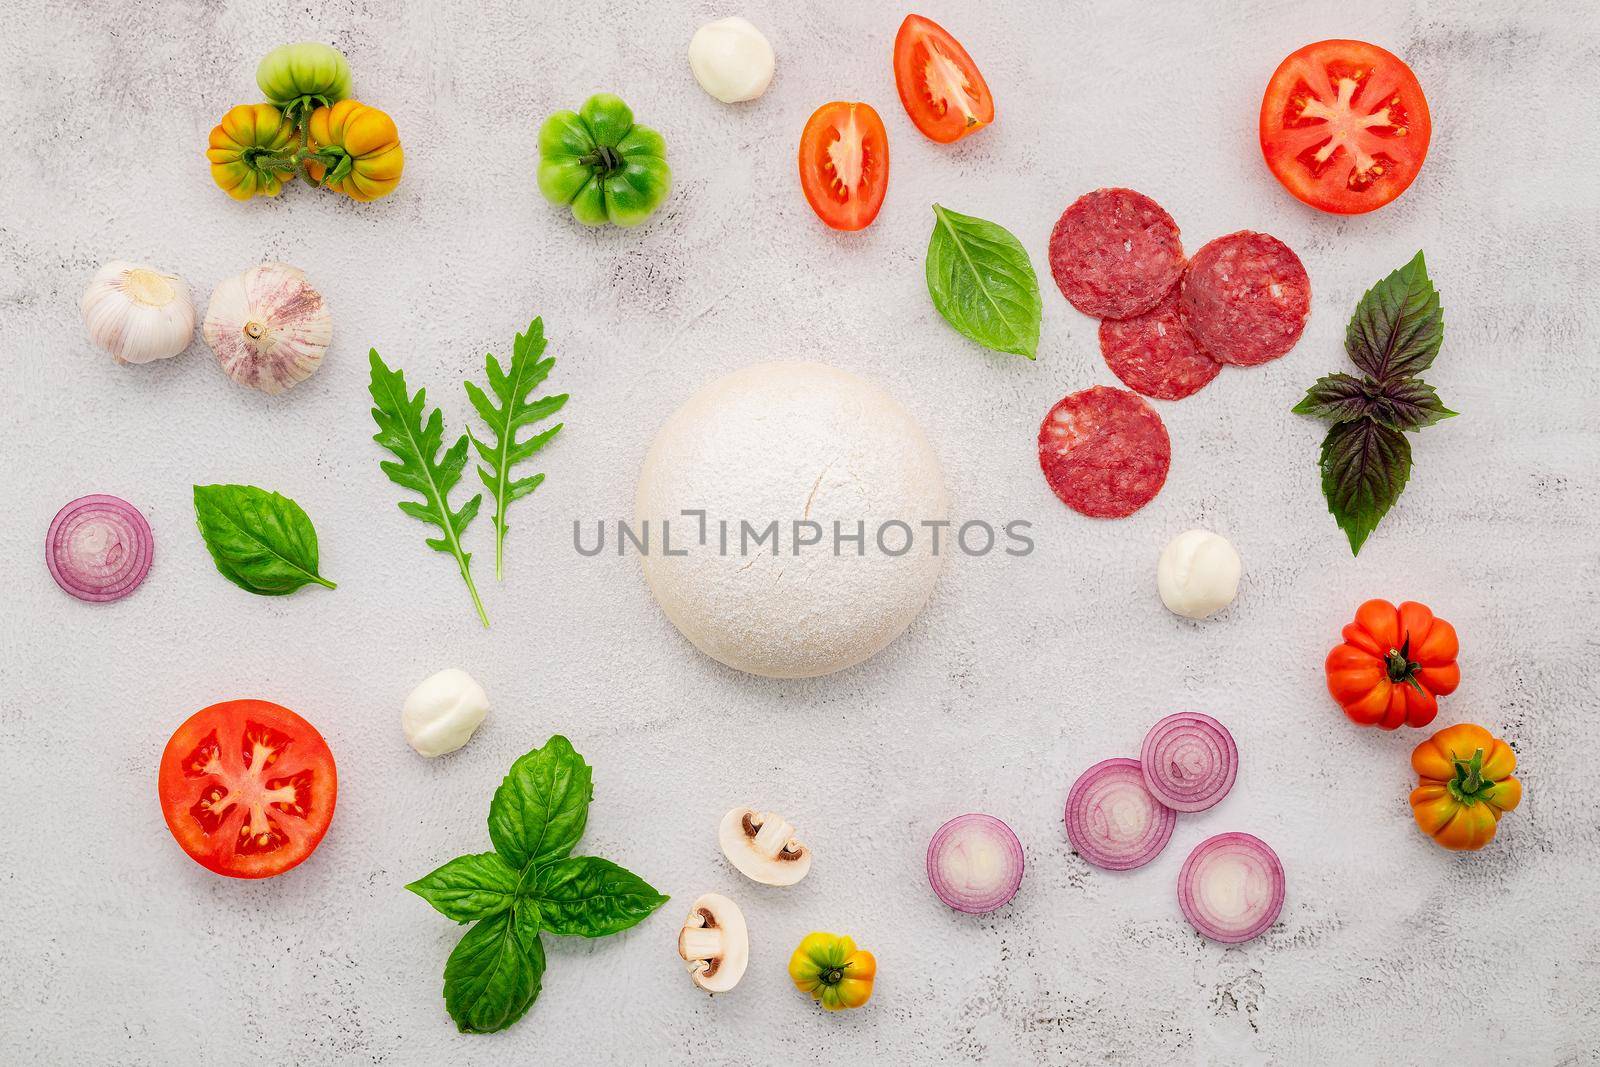 The ingredients for homemade pizza set up on white concrete background.